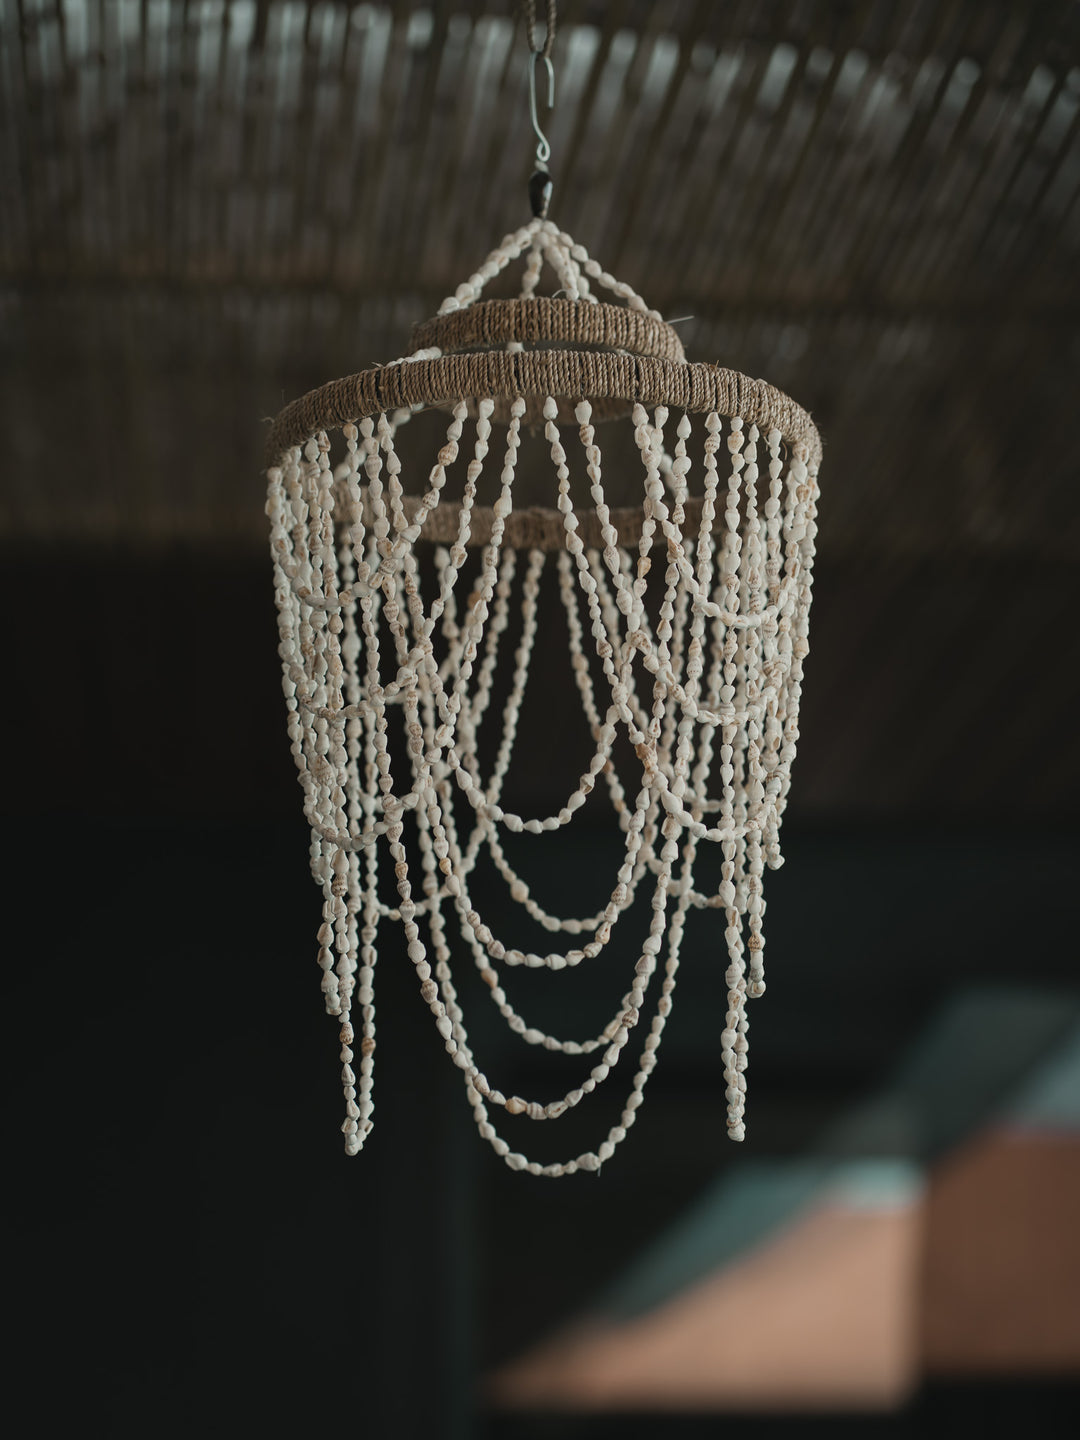 Small Balinese pendant lamp in shells